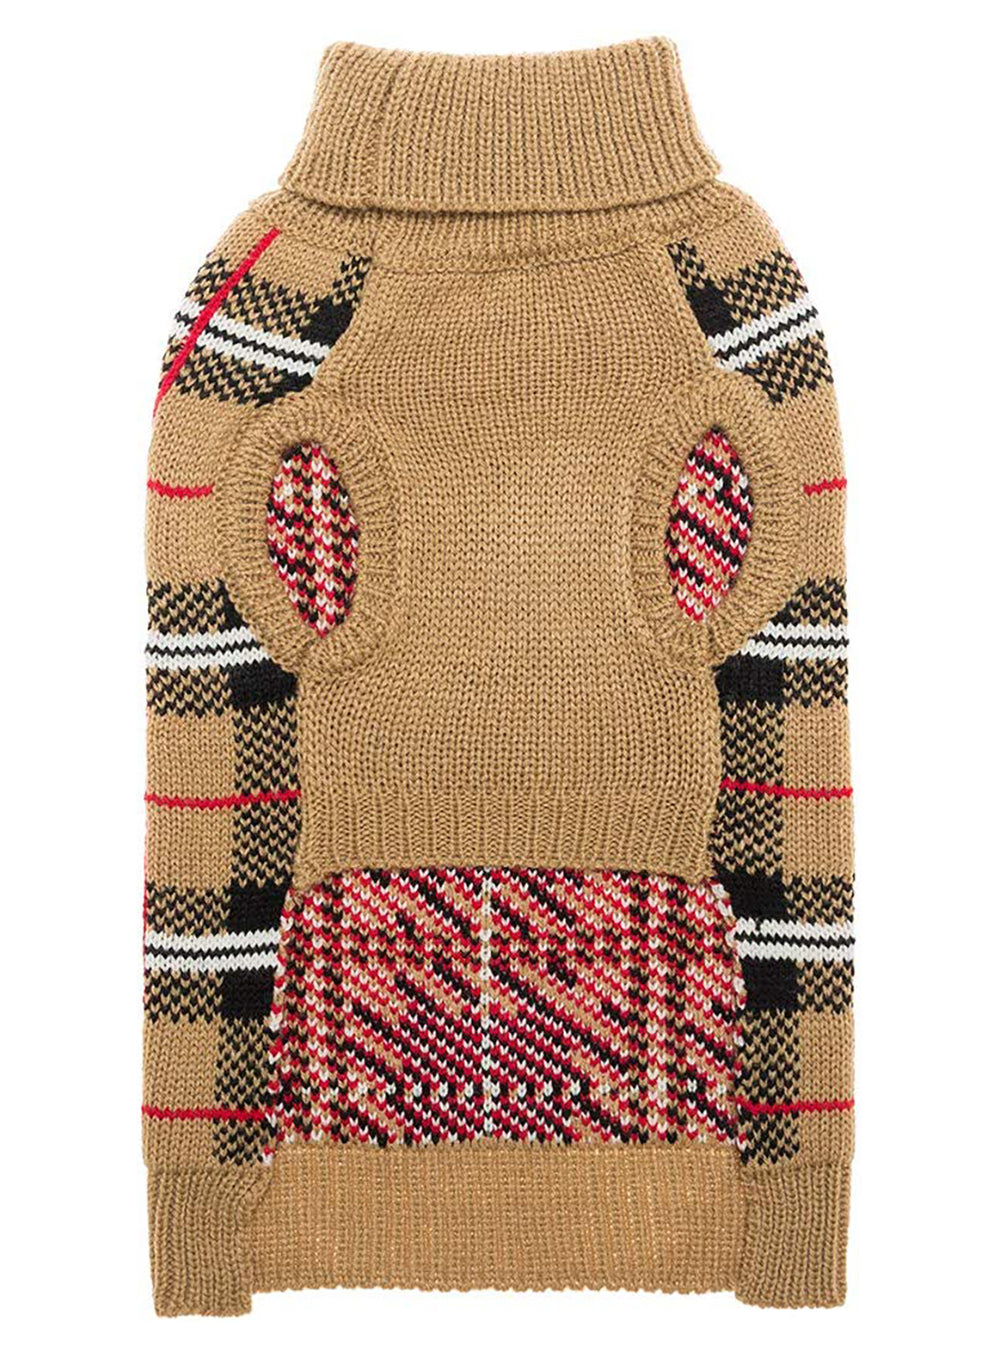 The Furberry Dog Sweater